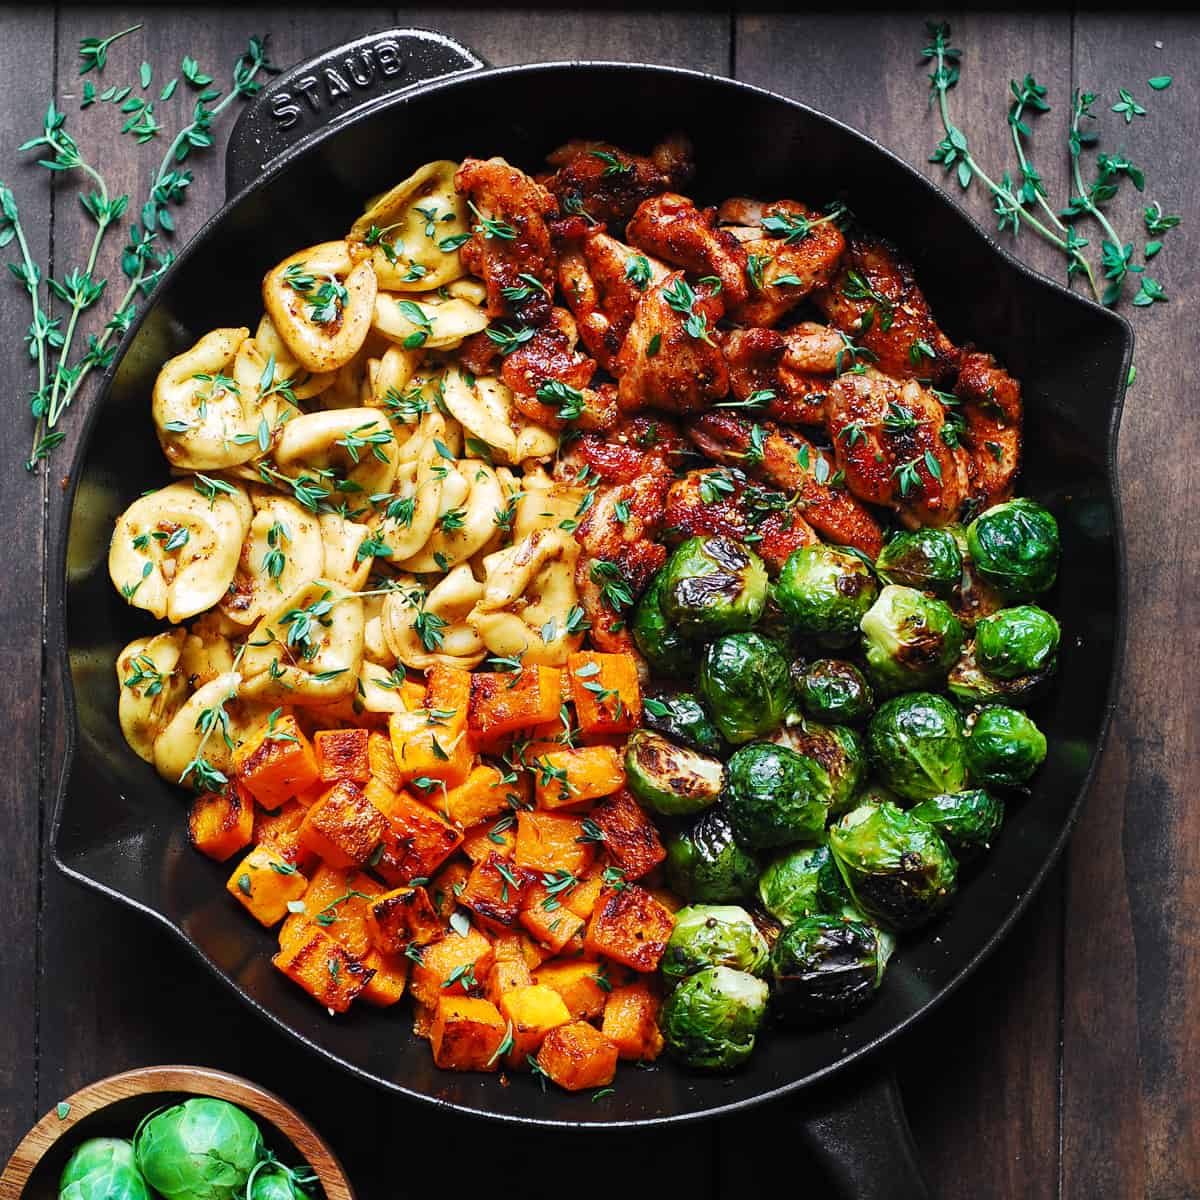 seared chicken, tortellini with roasted butternut squash and brussels sprouts in a cast-iron skillet